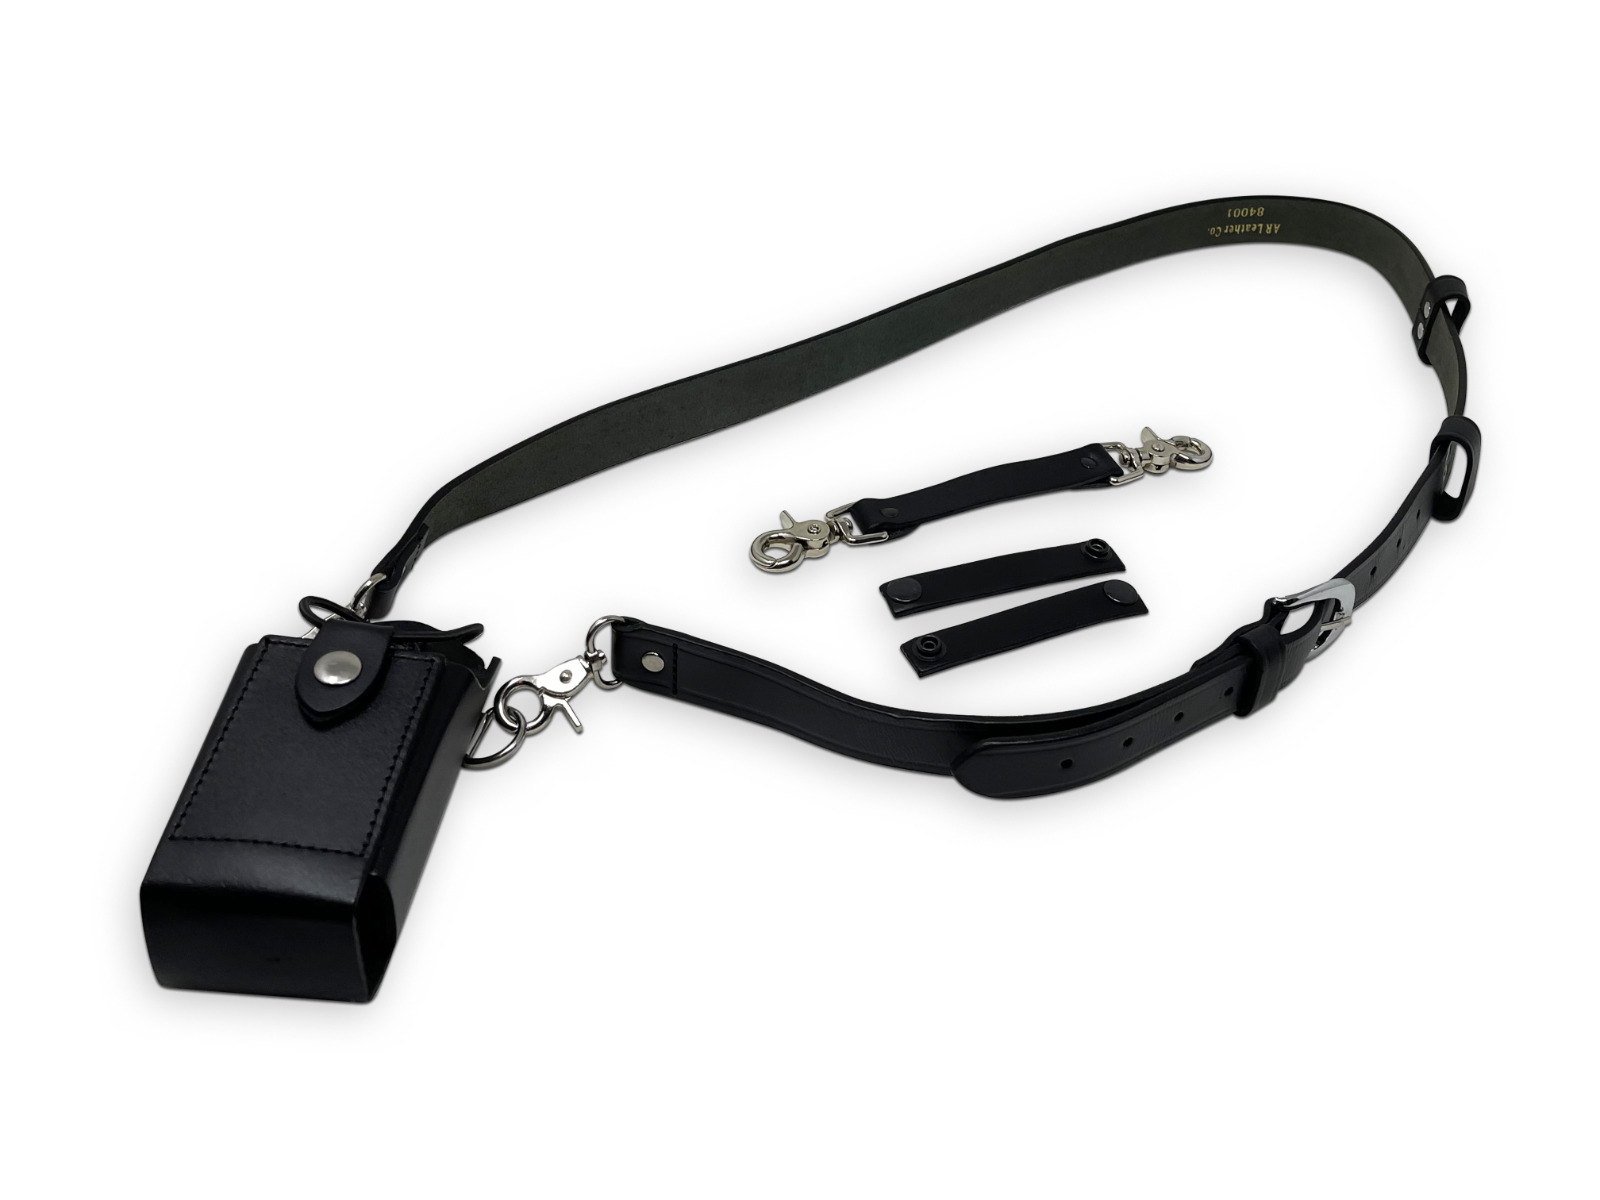 Firefighter Radio Strap & Holder - Fire EMS Police - Mic Loops and Anti-Sway